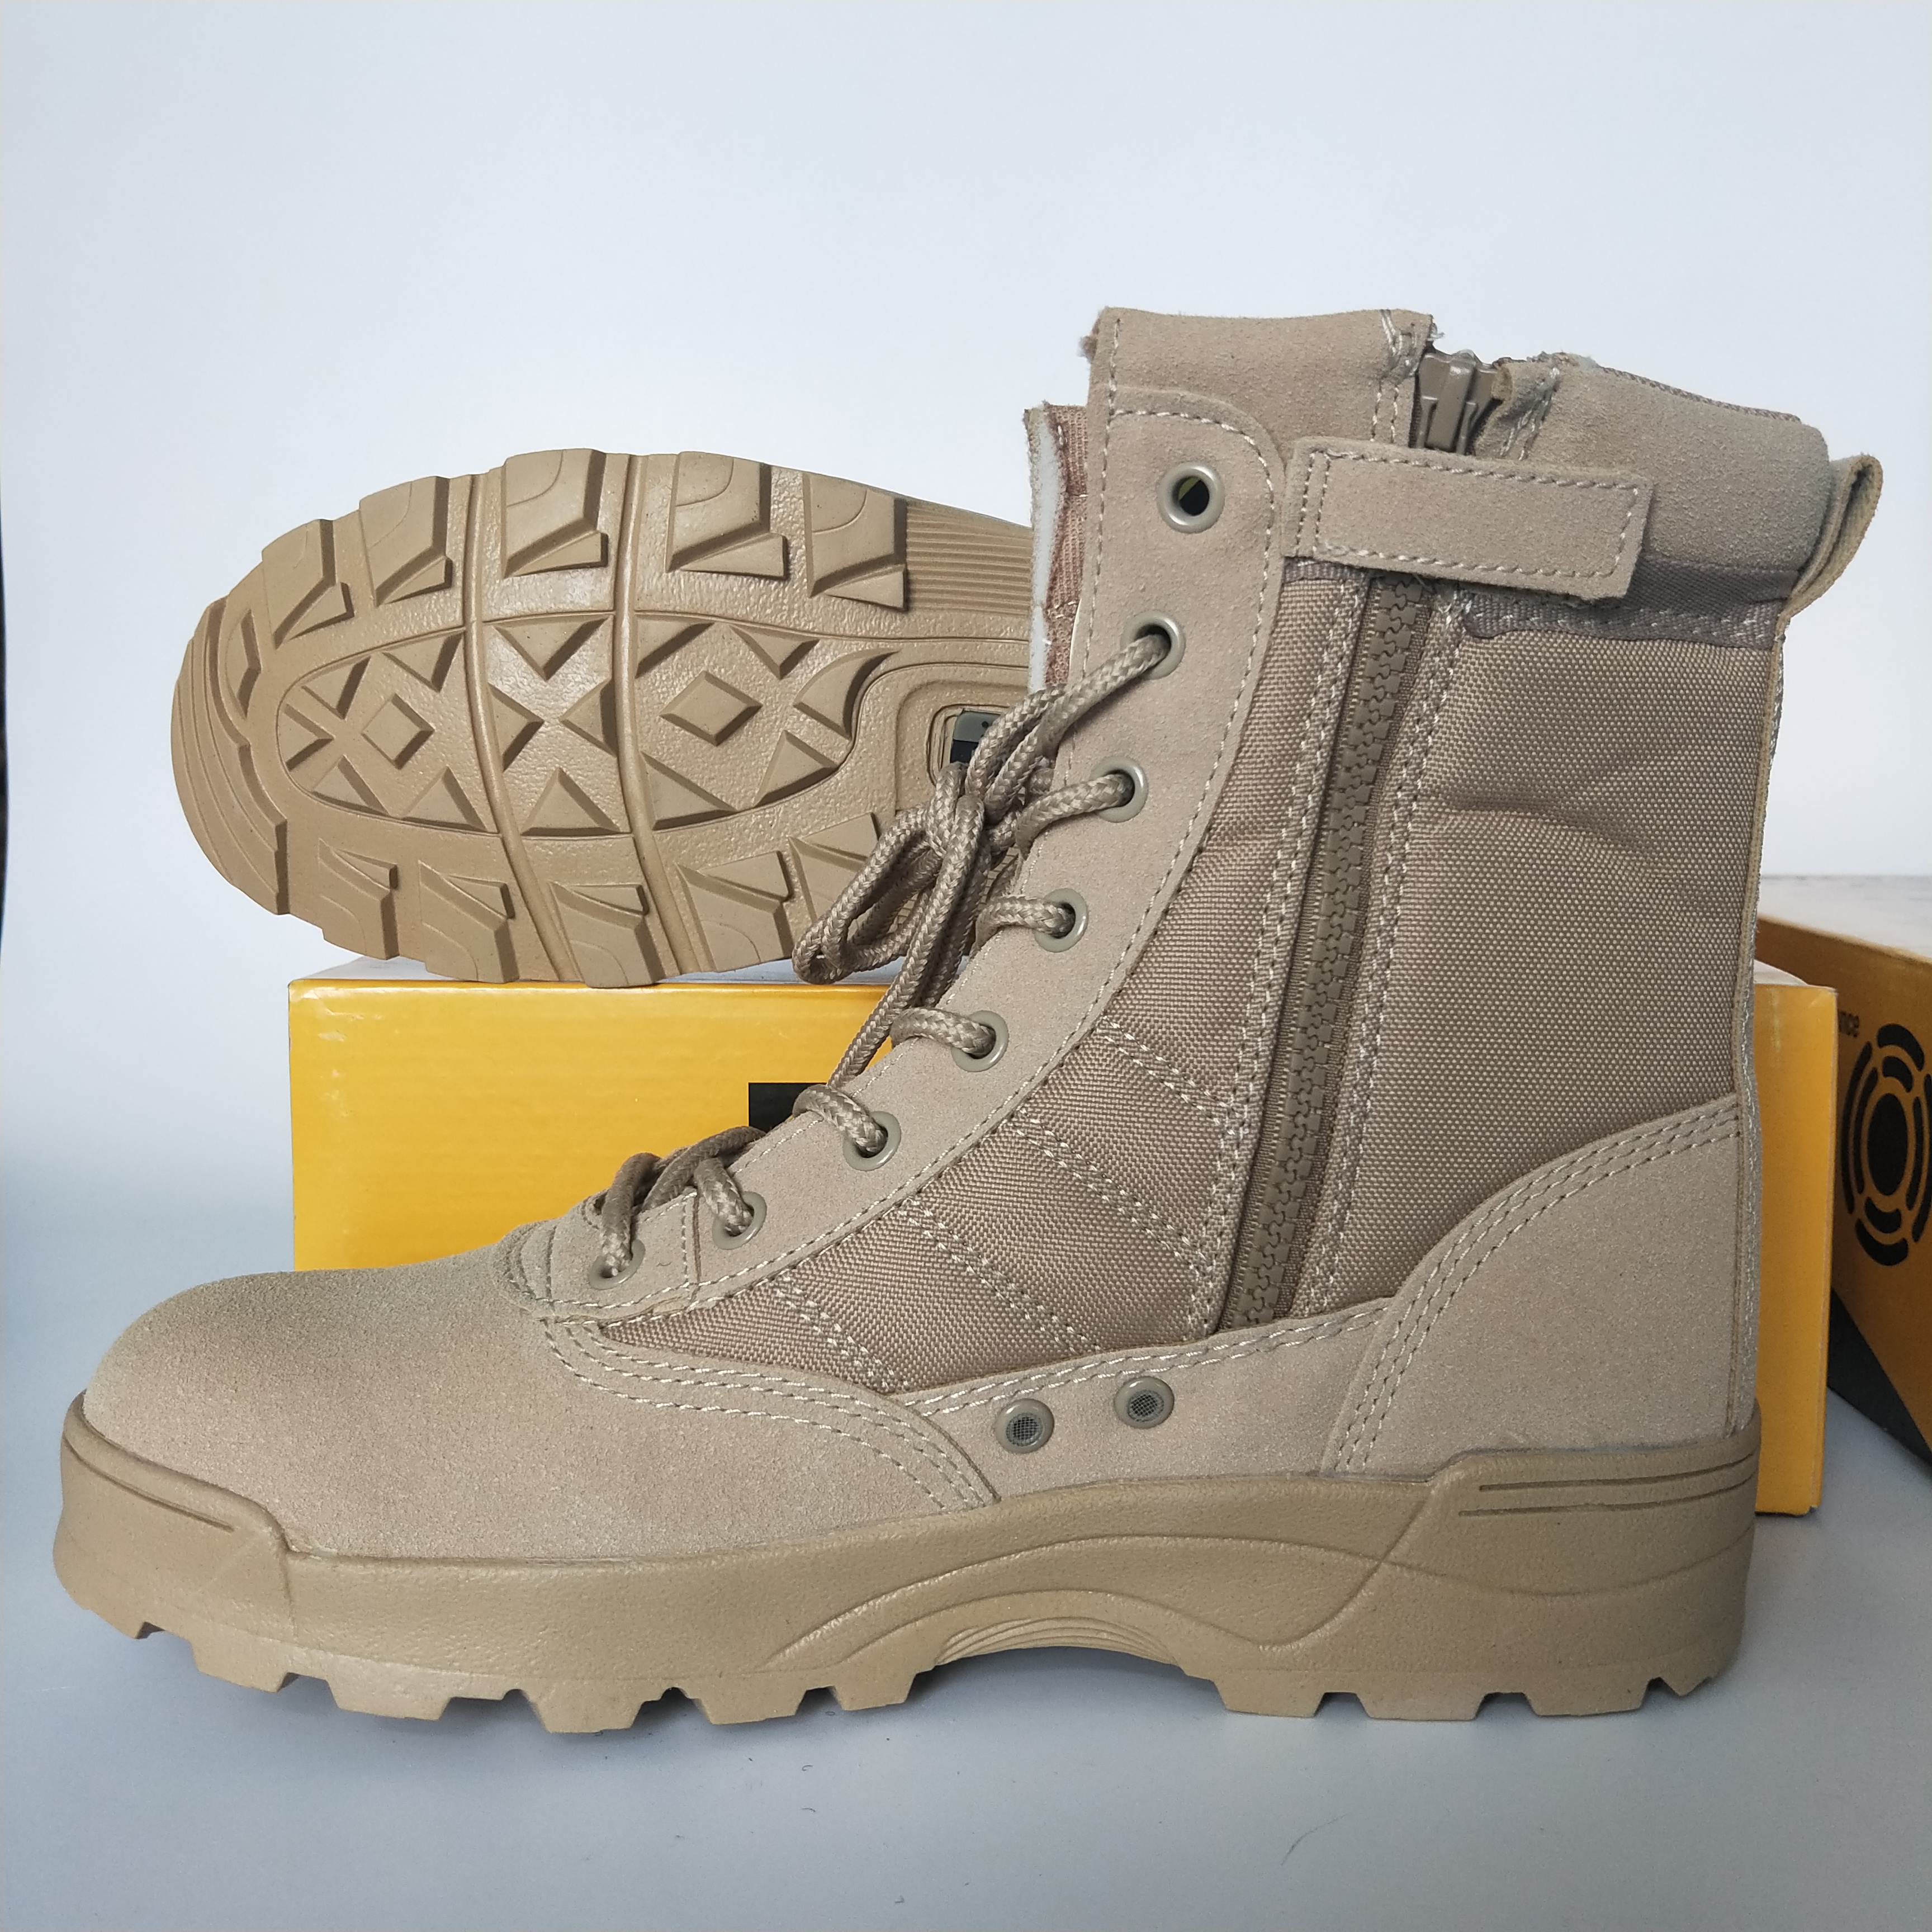 Wholesale Stock Military Boots SWAT Desert Tactical Boots